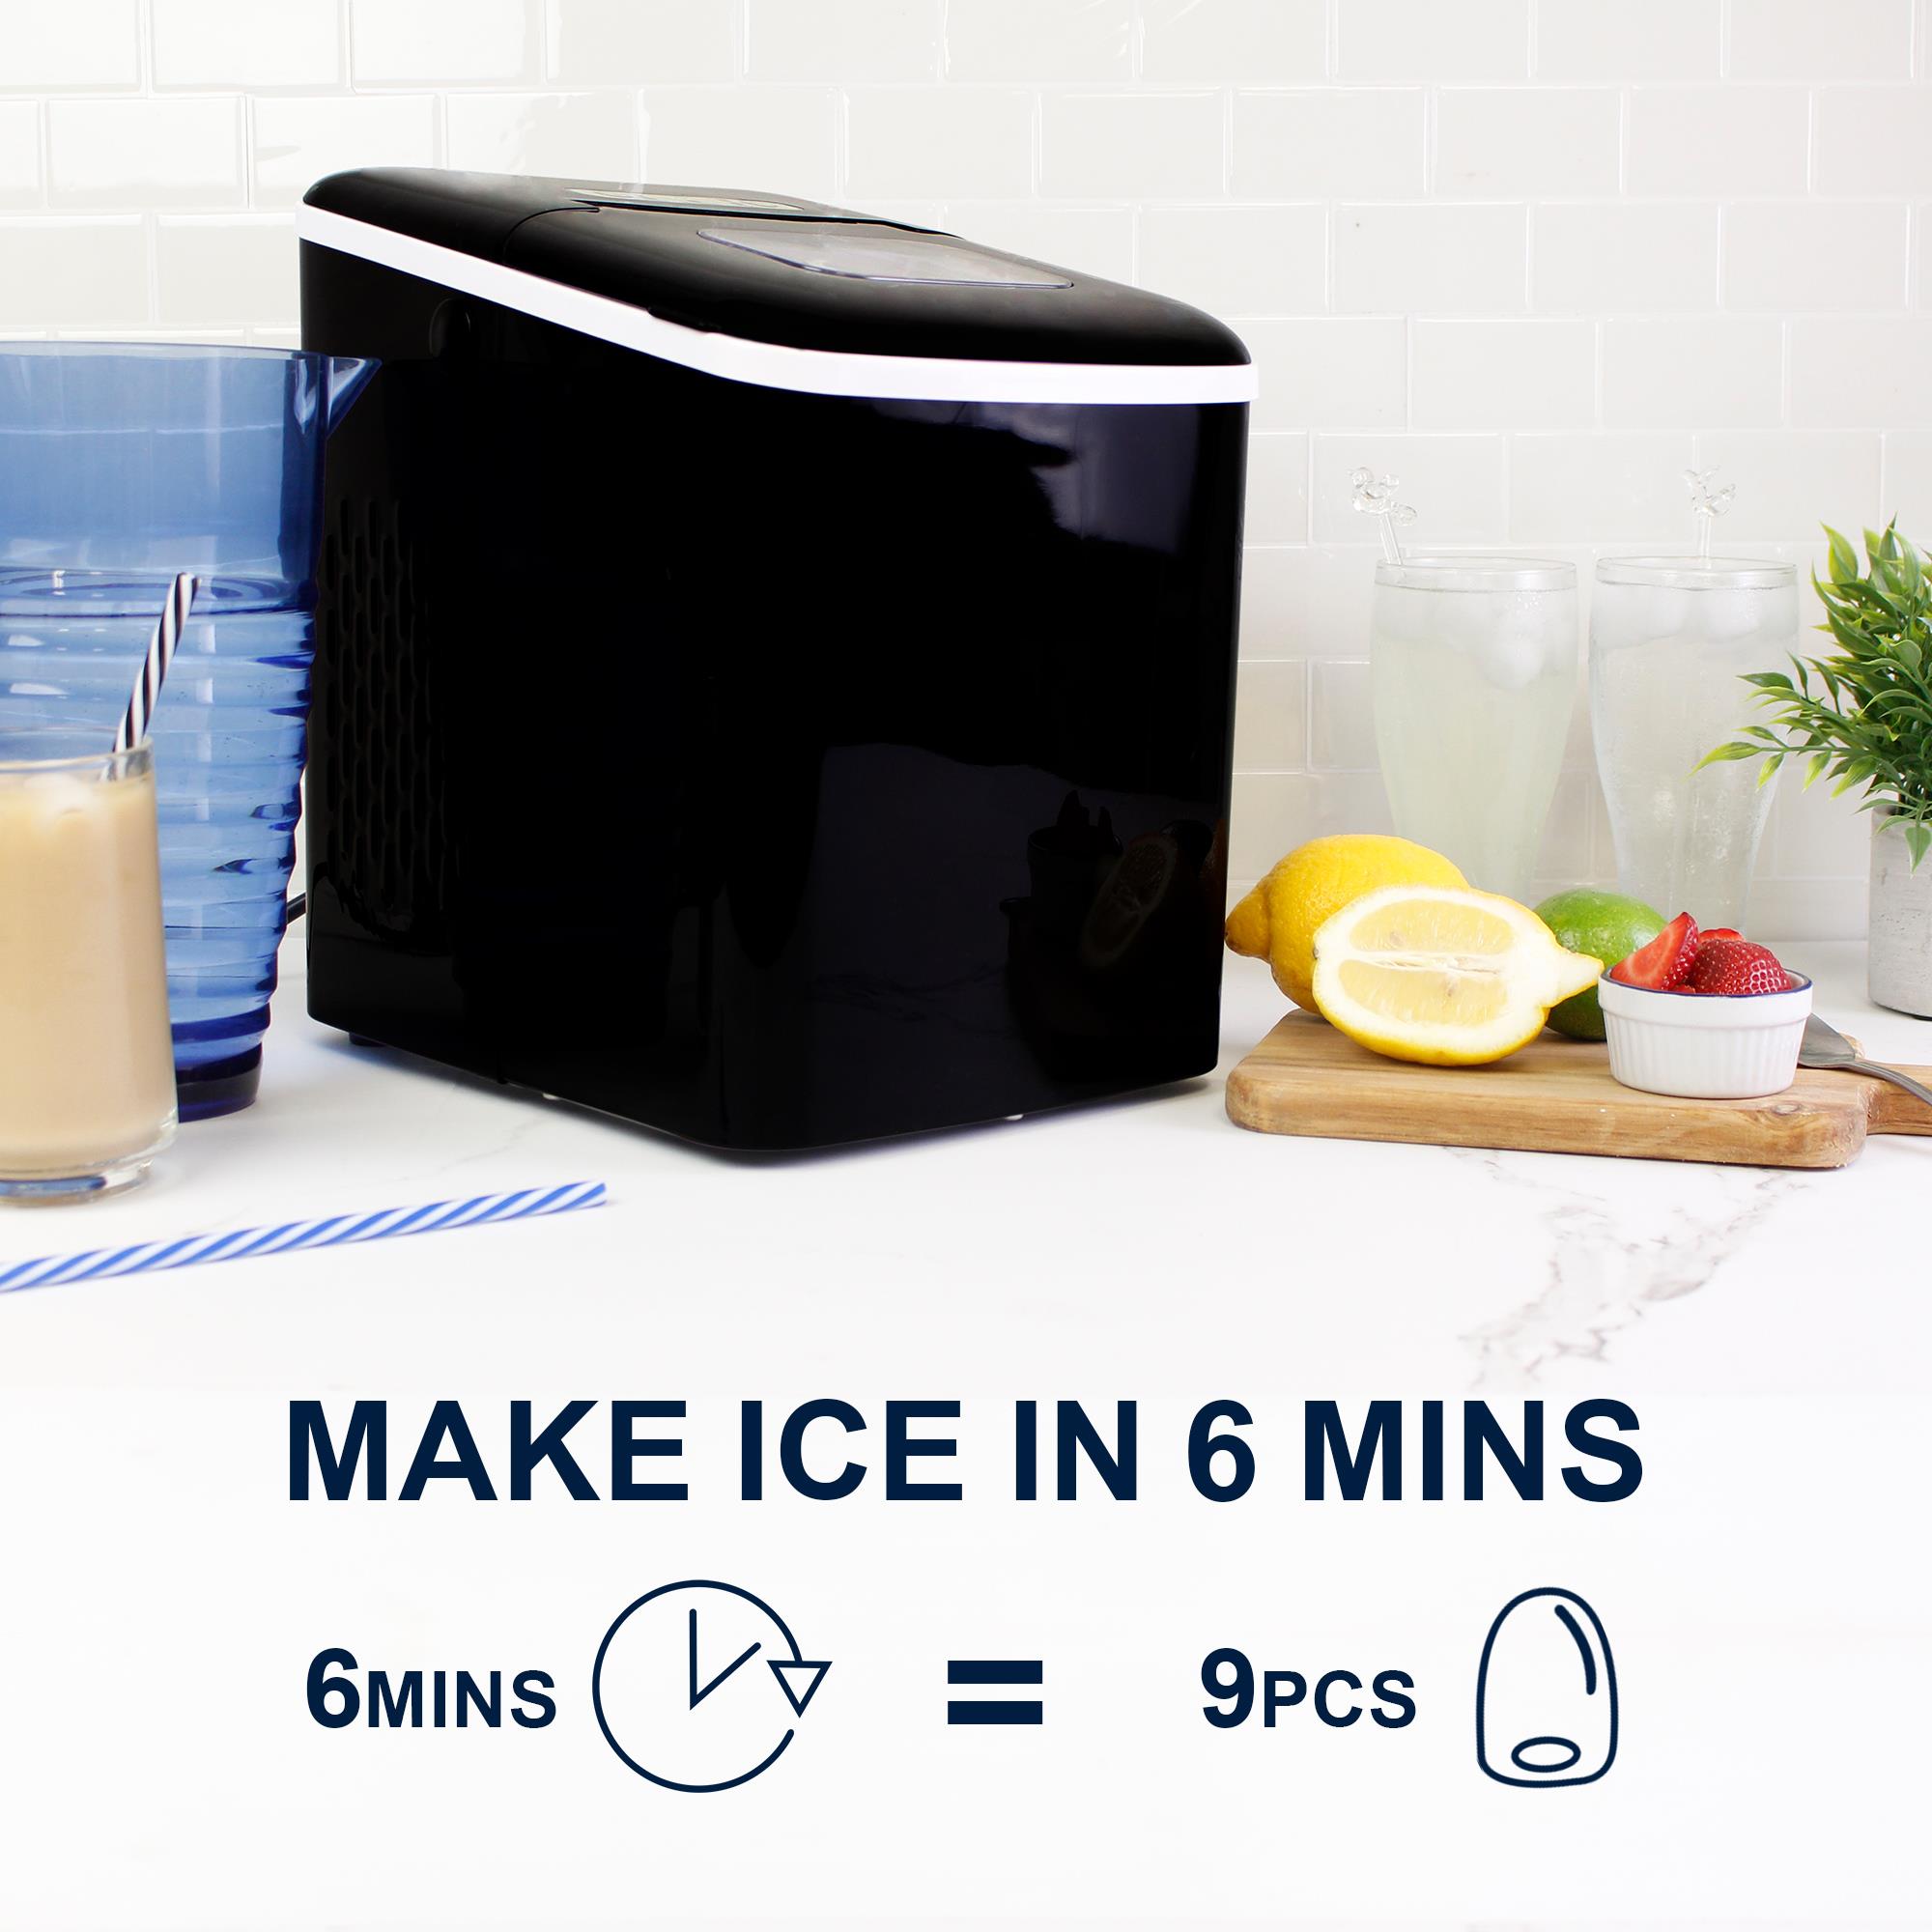 KISSAIR Countertop Ice Maker Machine 6-Minute Fast Bullet Ice